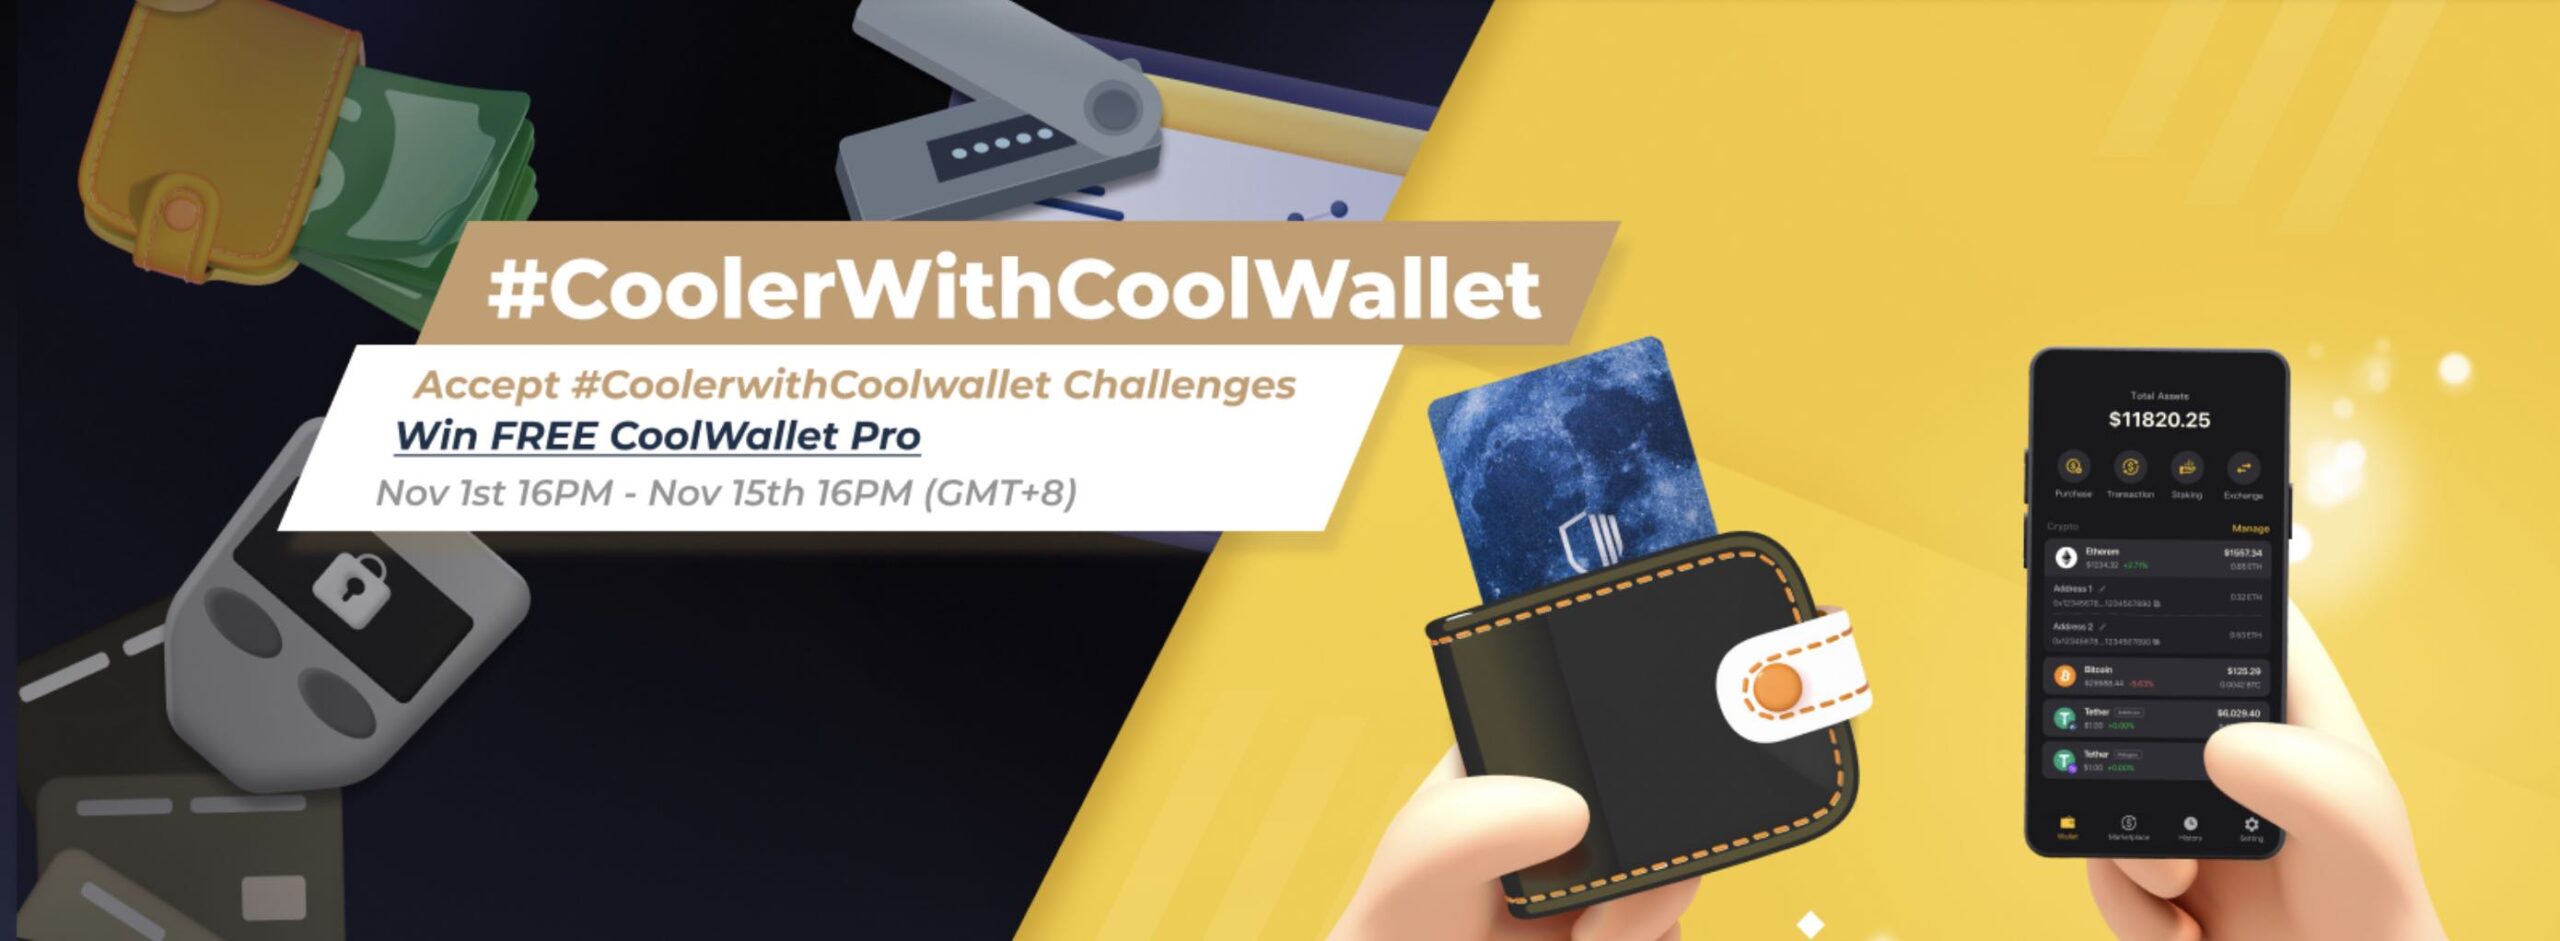 Desafio #CoolerWithCoolWallet